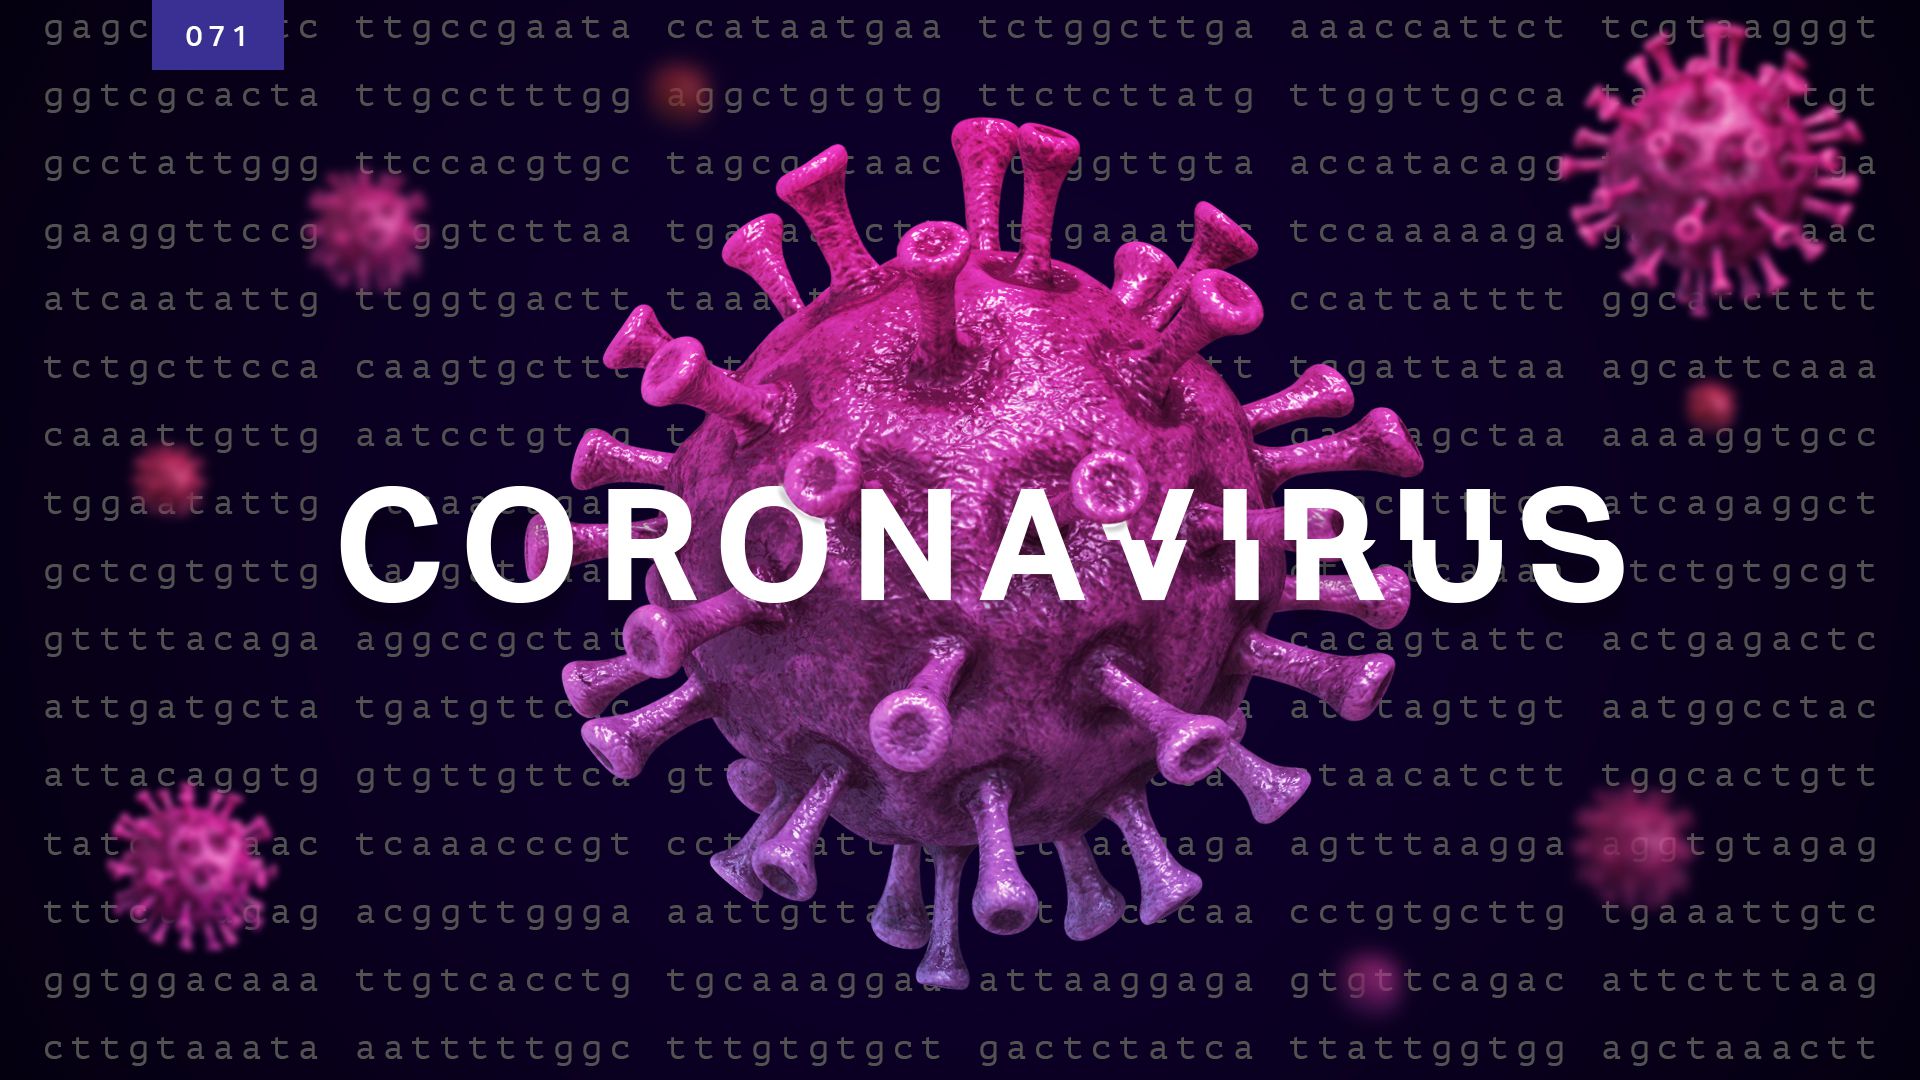 To fight the coronavirus, labs are printing its genome - The Verge